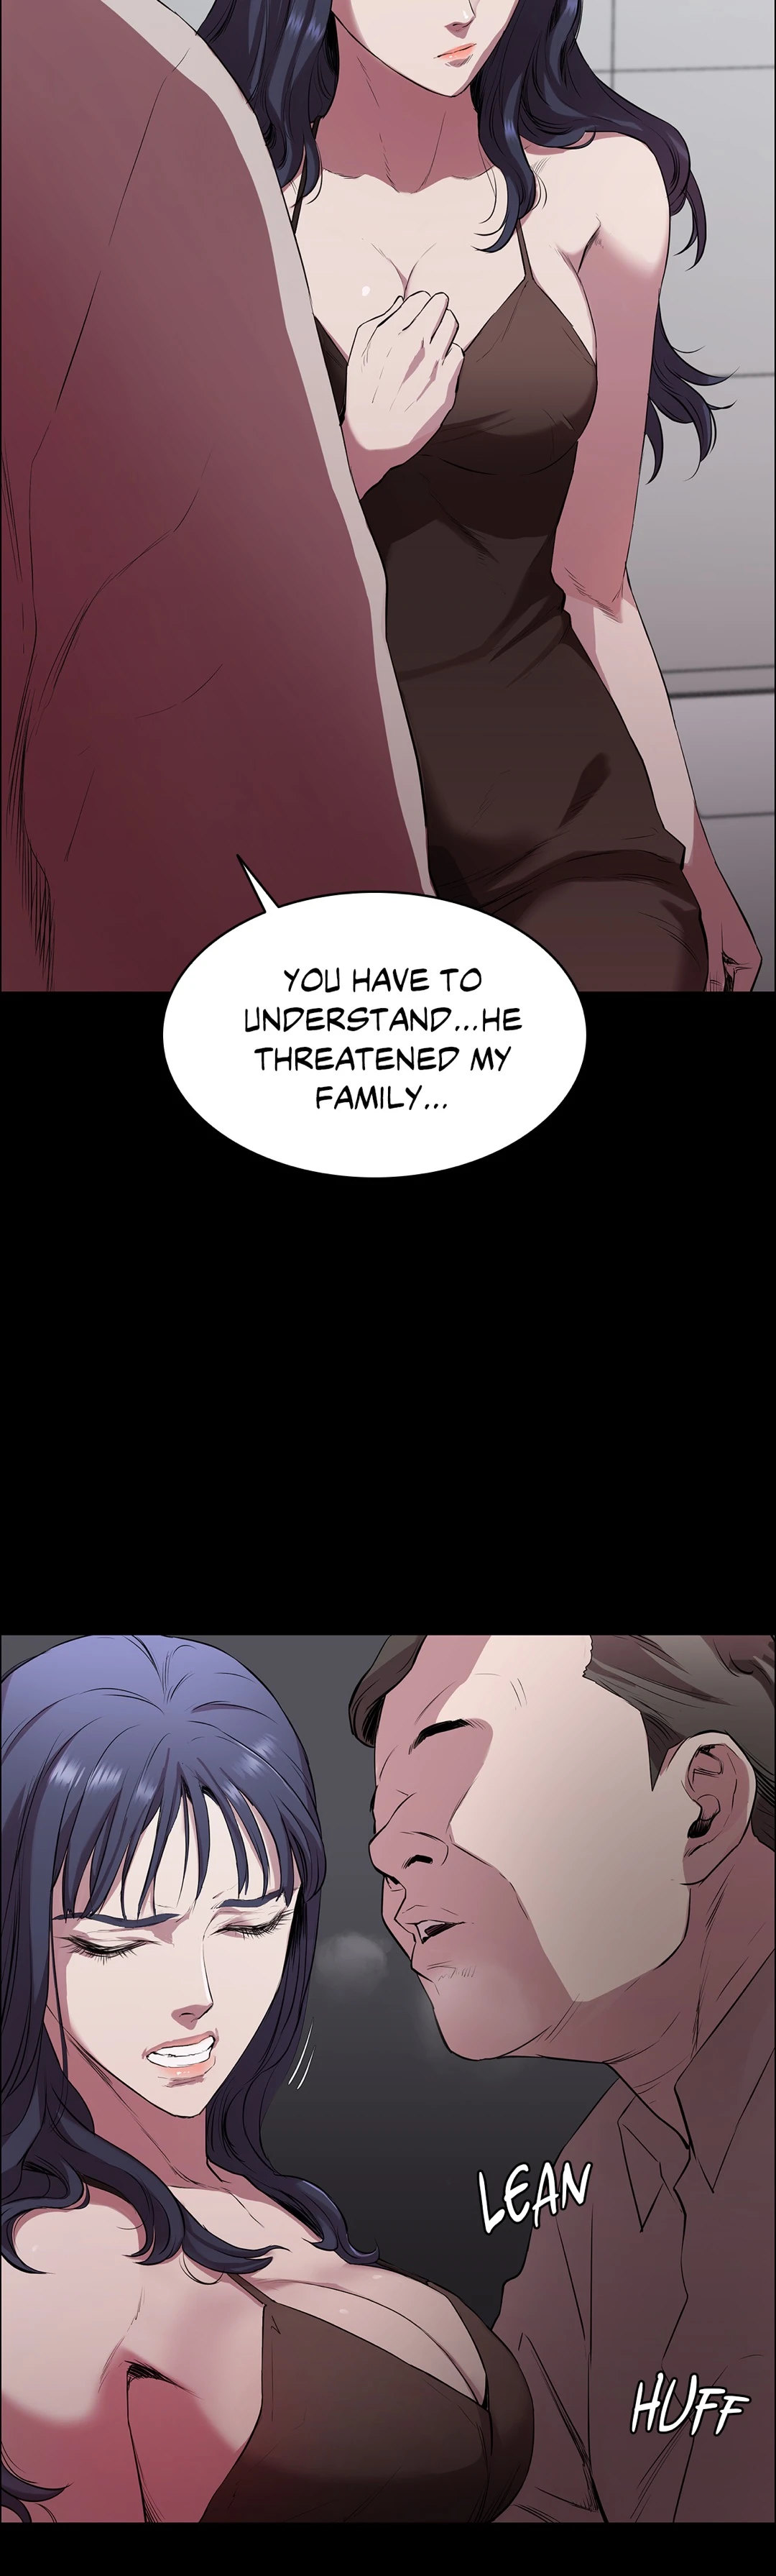 Thorns on Innocence - Chapter 3 Page 17